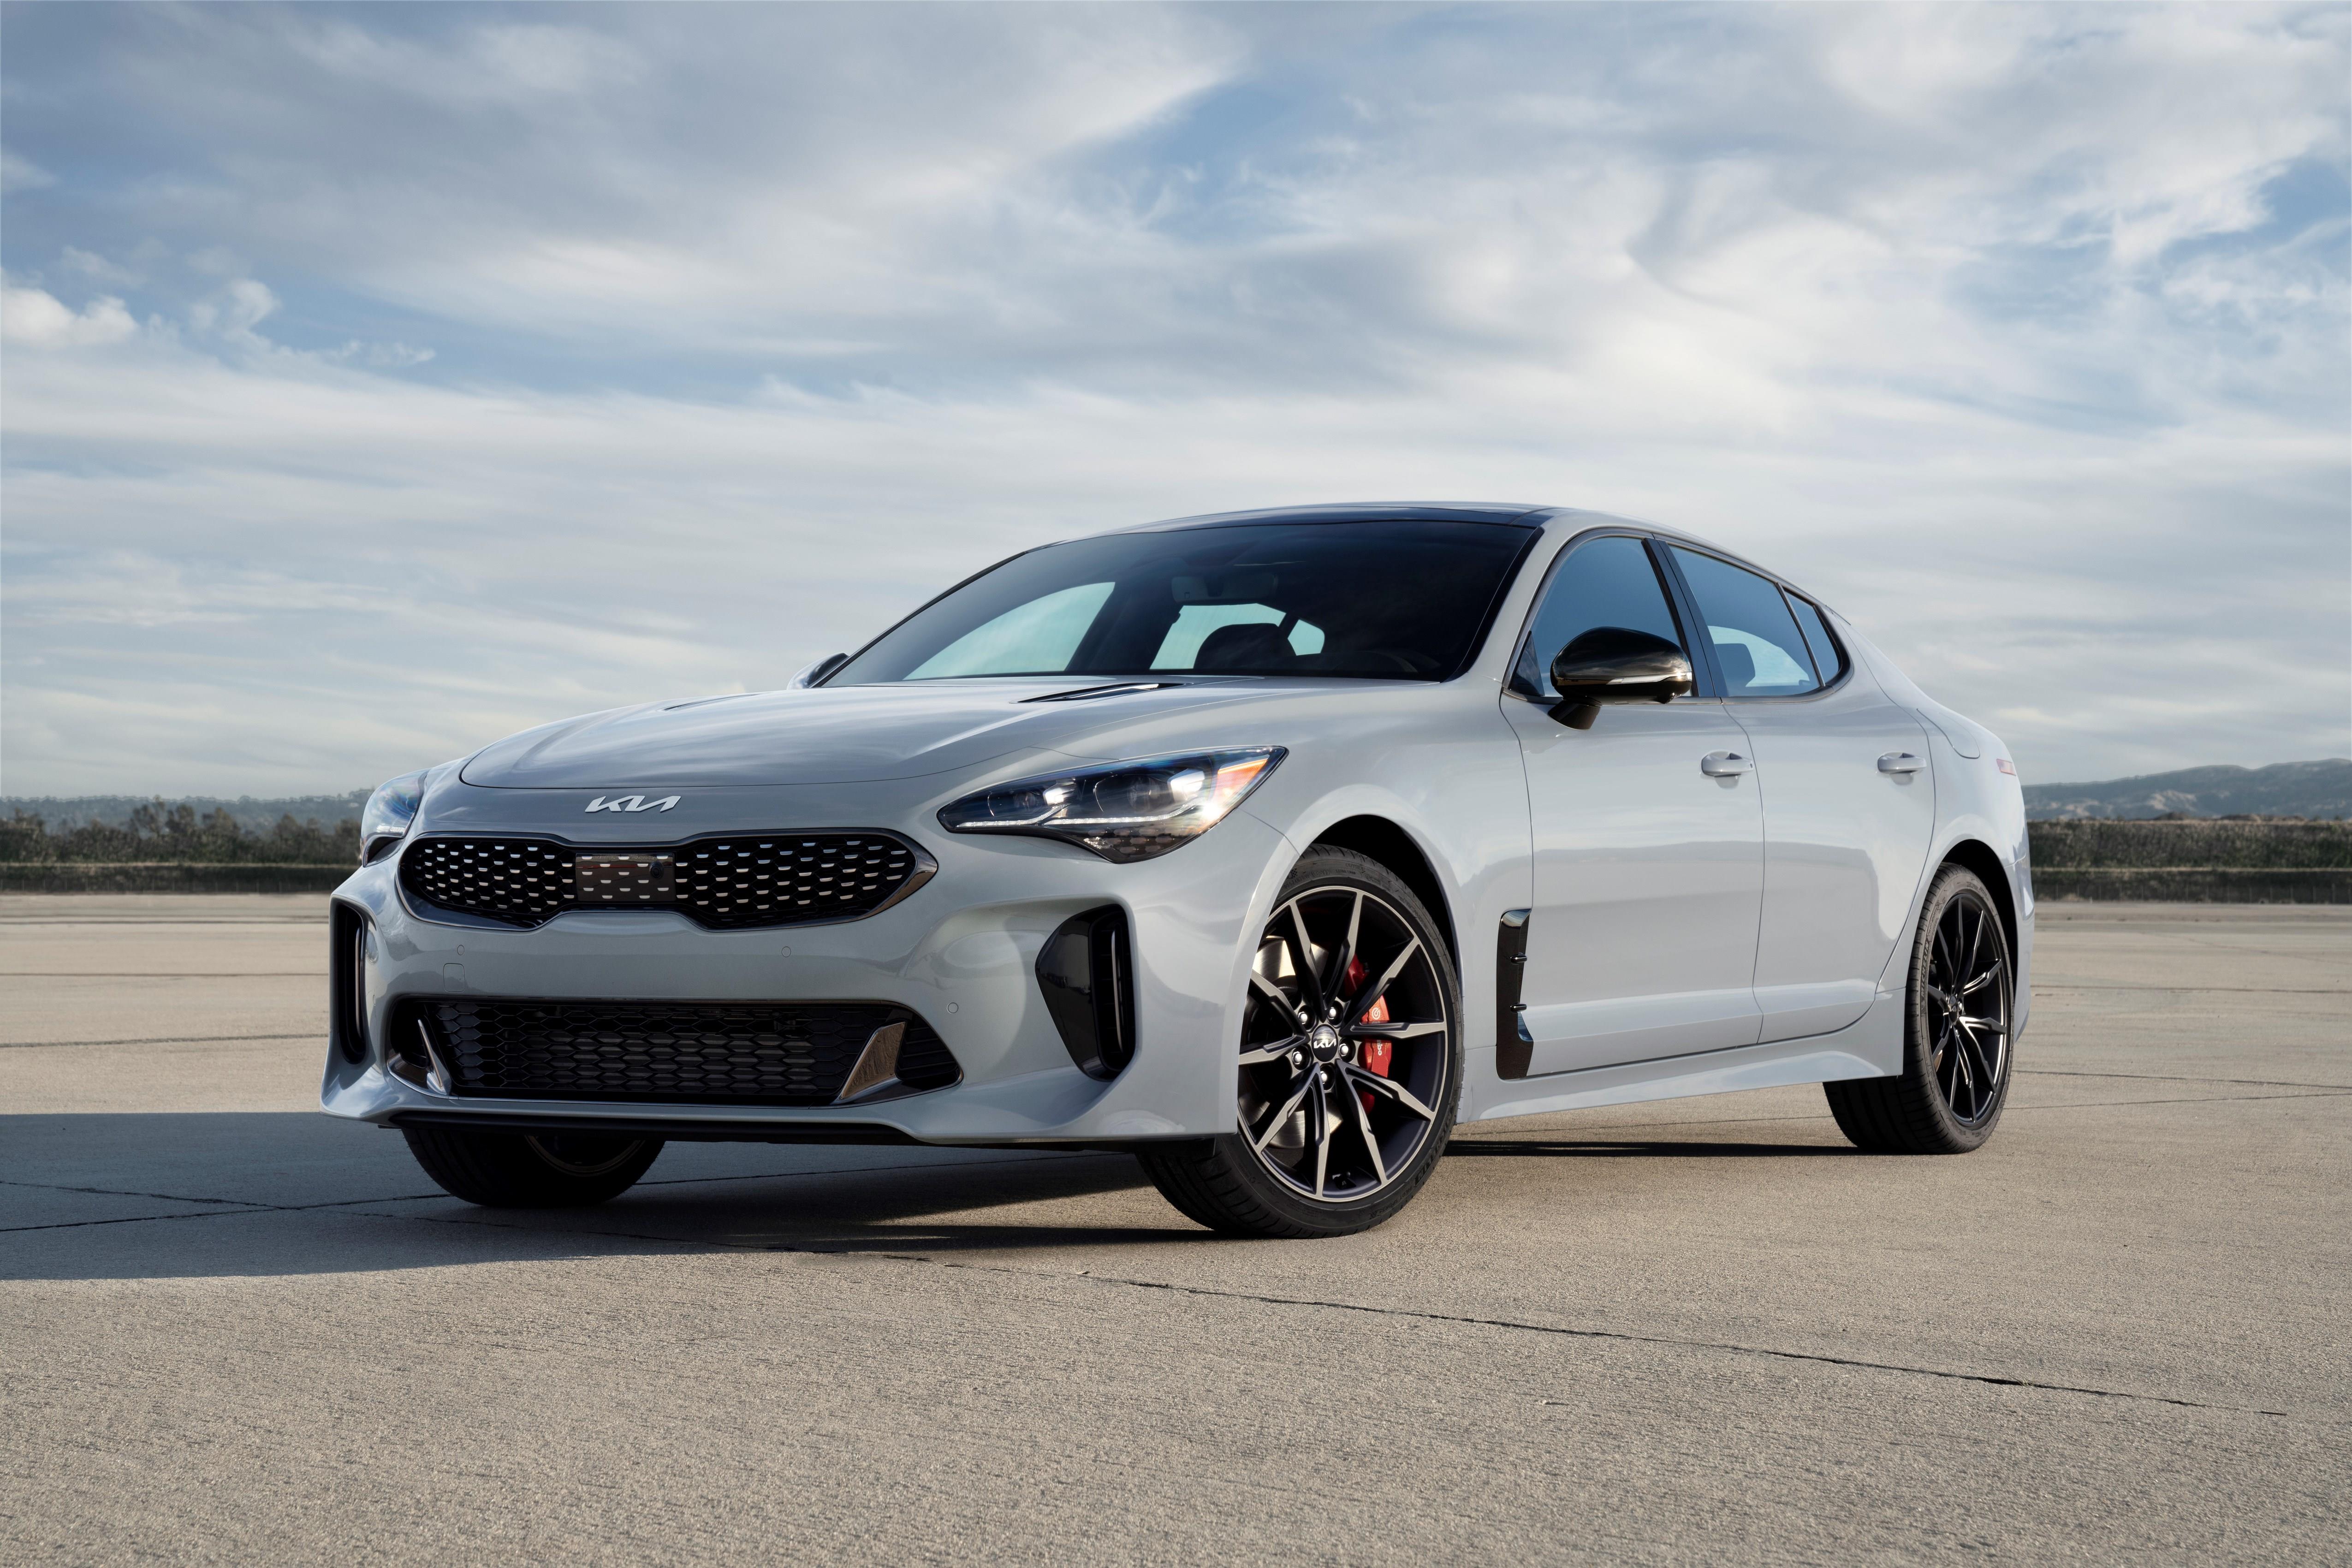 2022 Kia Stinger Special Edition Arrives in Dealers